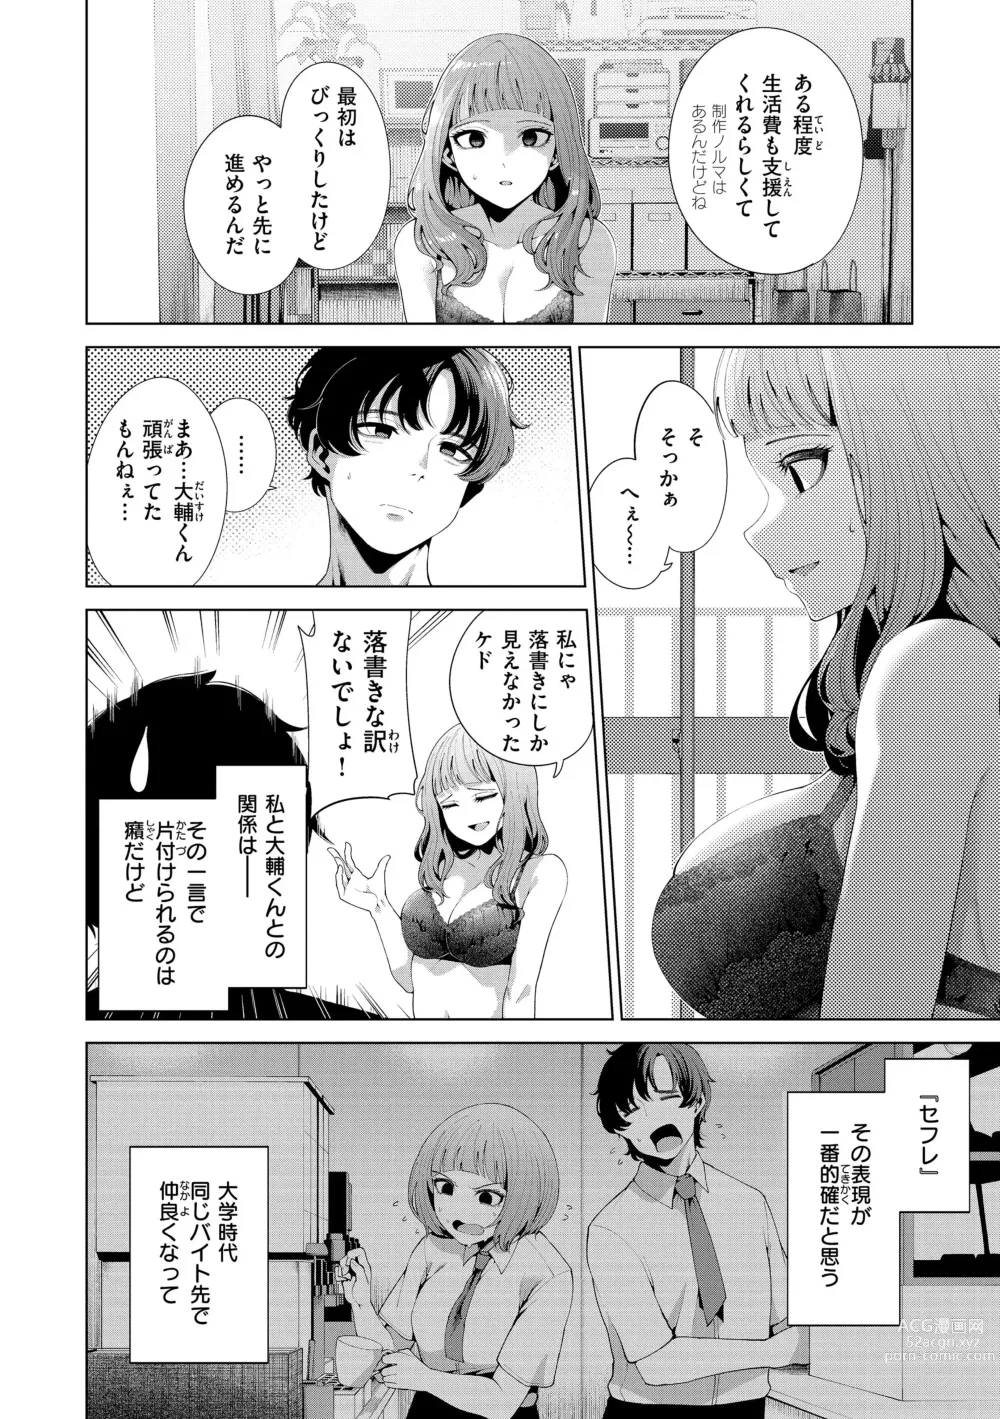 Page 8 of manga Watashi de Sometai - Dyed with Your Color.